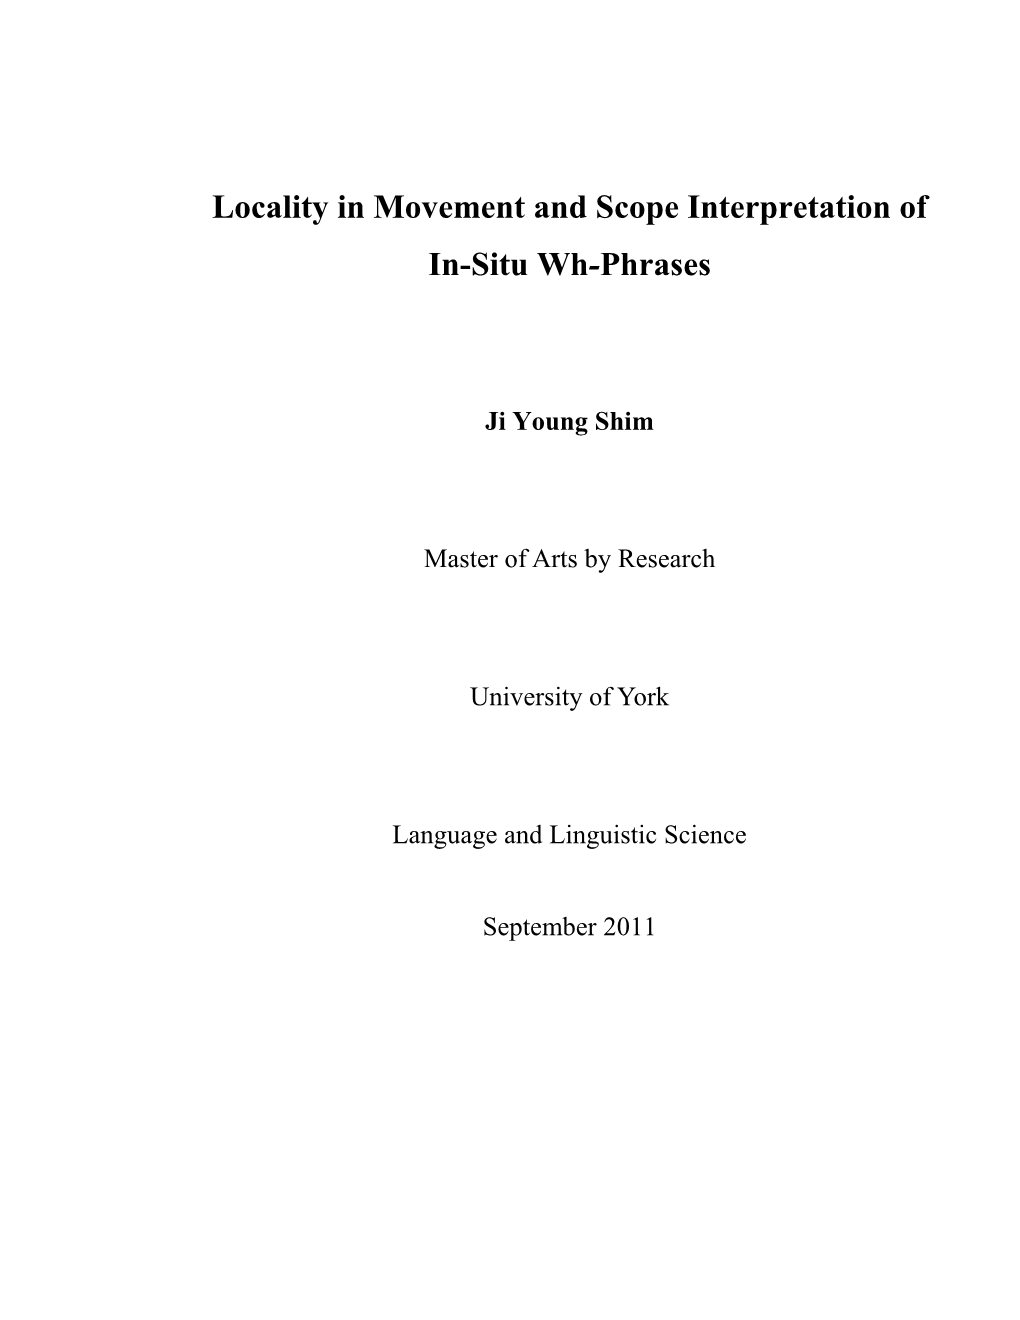 Locality in Movement and Scope Interpretation of In-Situ Wh-Phrases